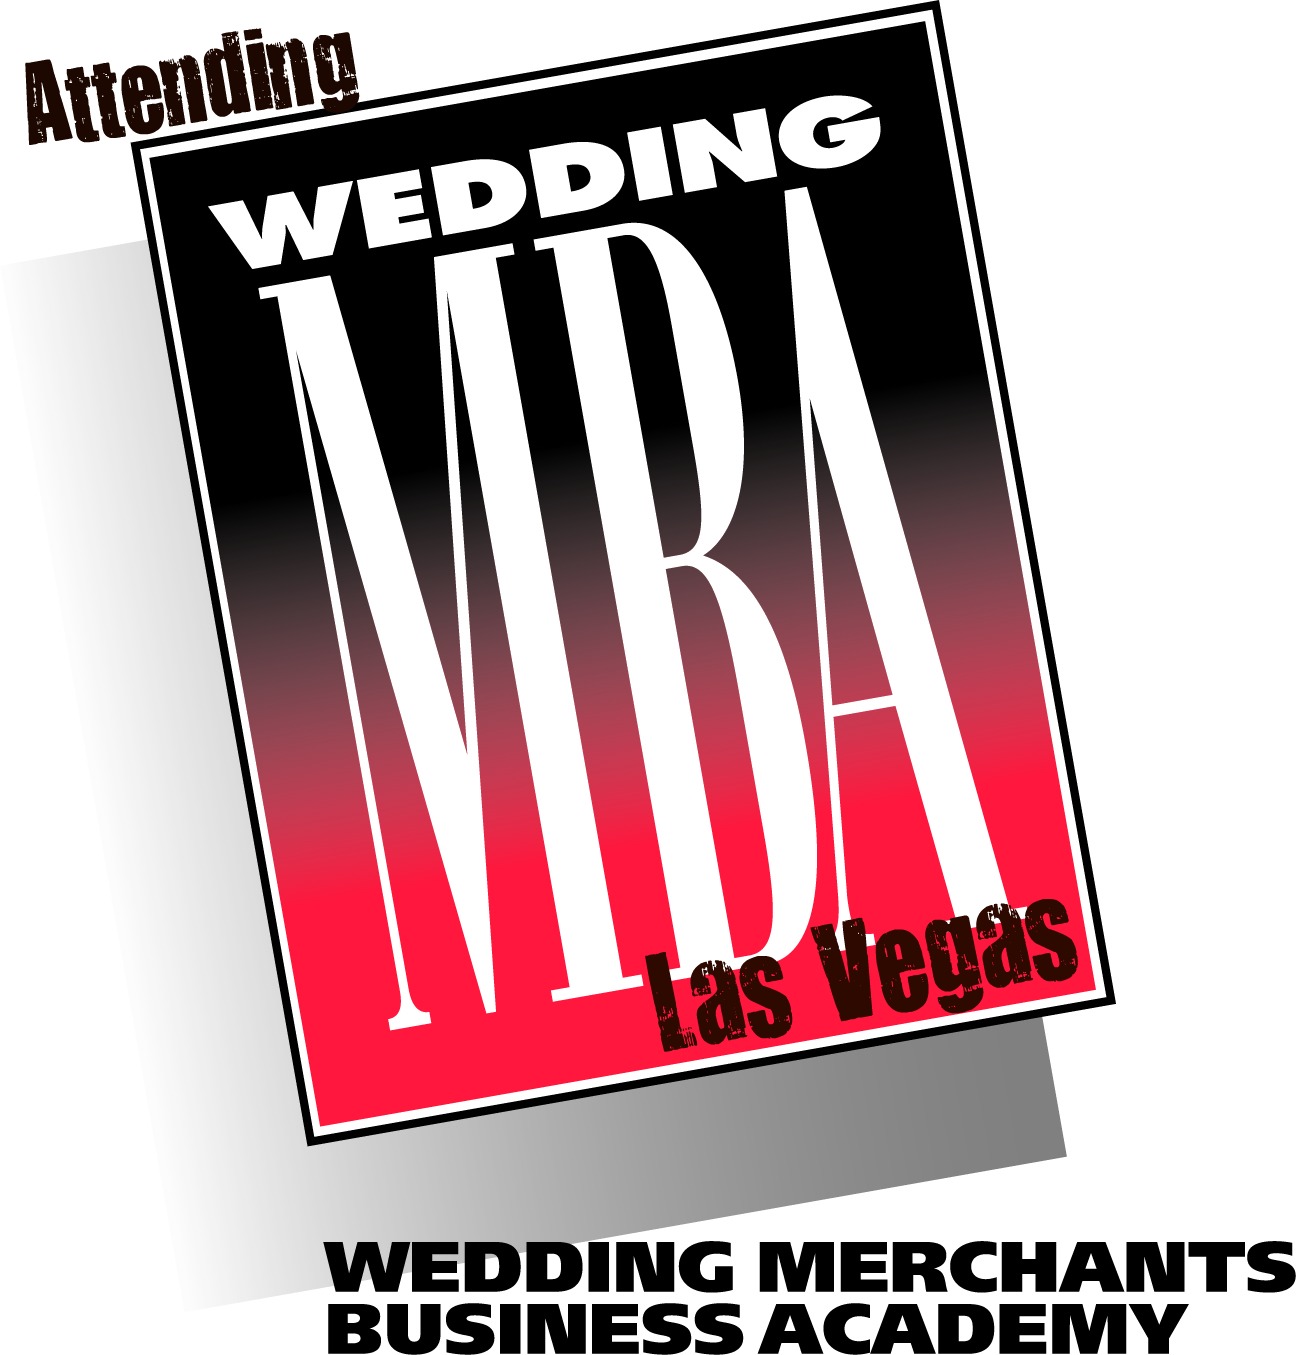 A passion driven by Weddings WEDDING MBA Las Vegas